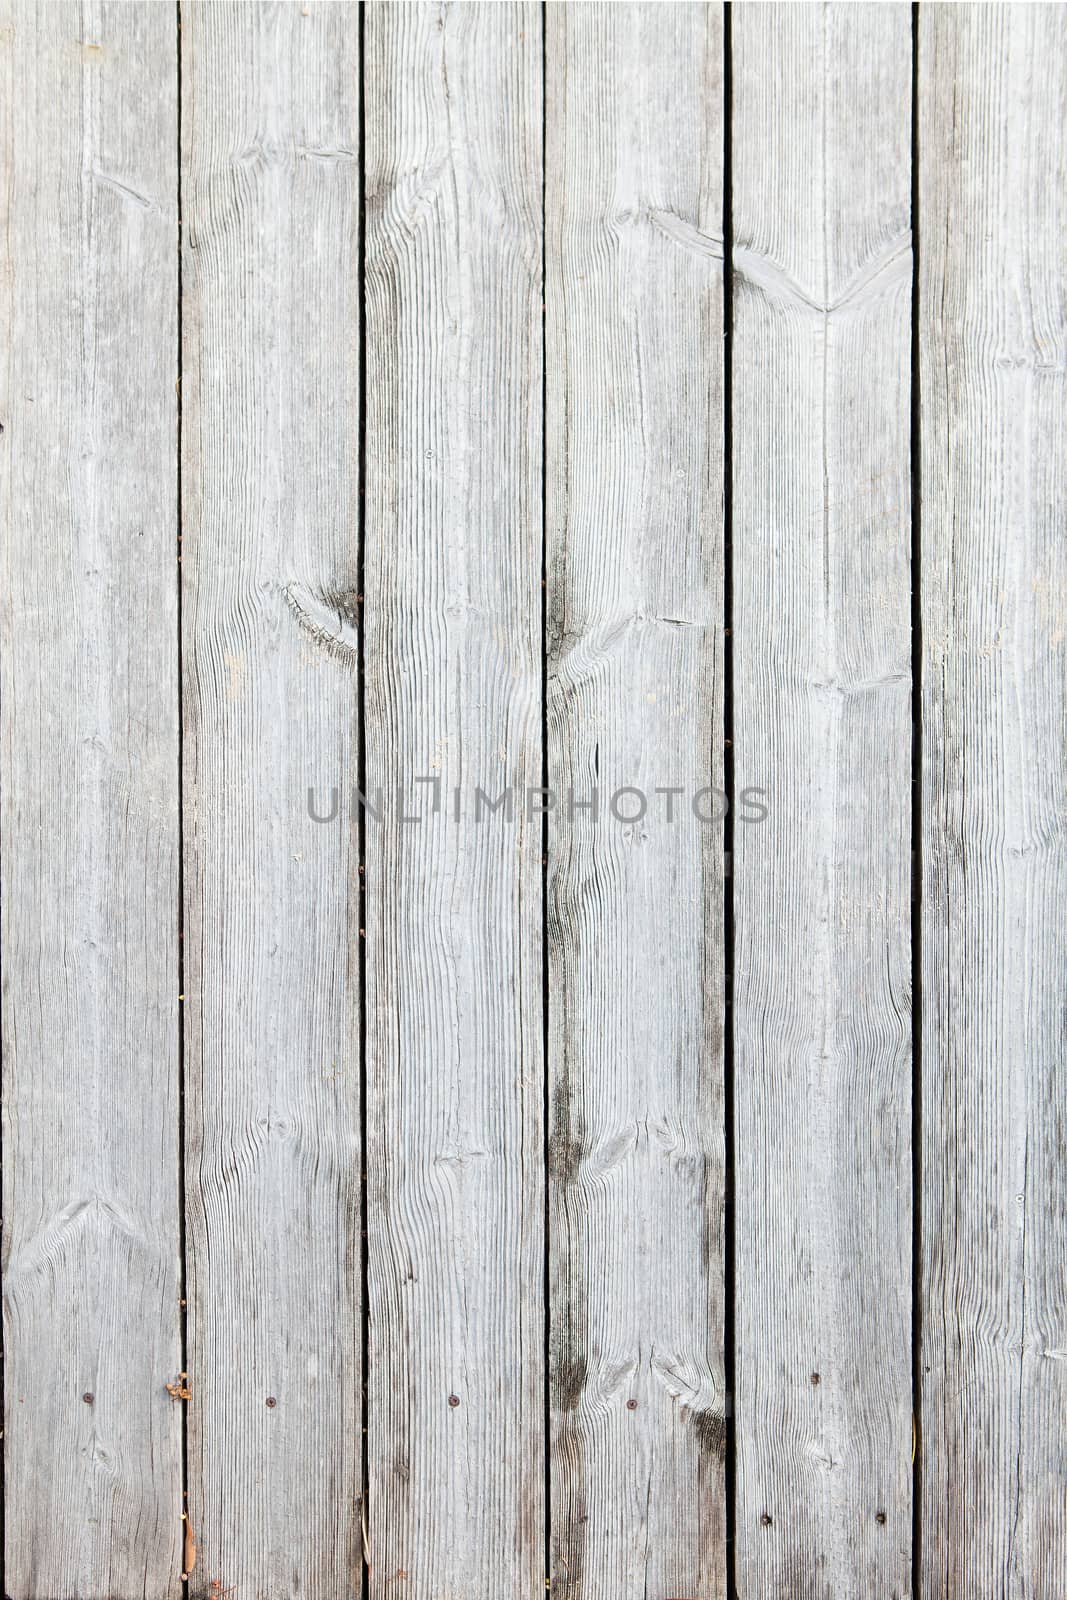 wood texture with natural patterns by jee1999